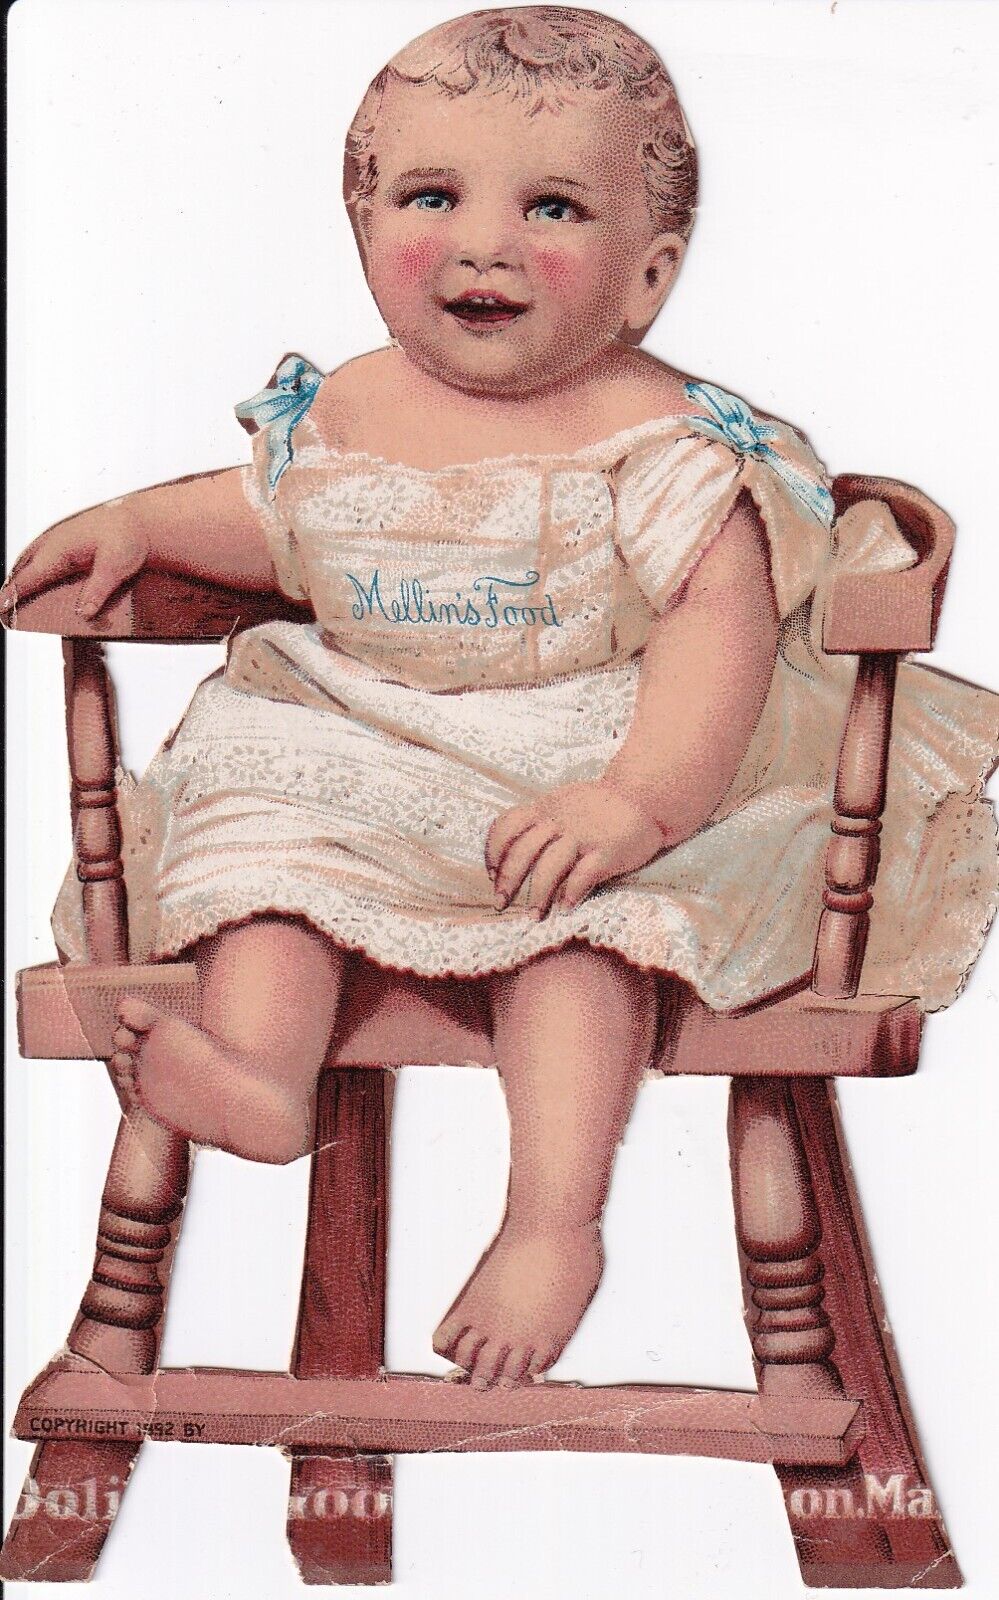 Vintage Mellins Food Advertisement Clipping Late 1800's Cute Baby In High Chair